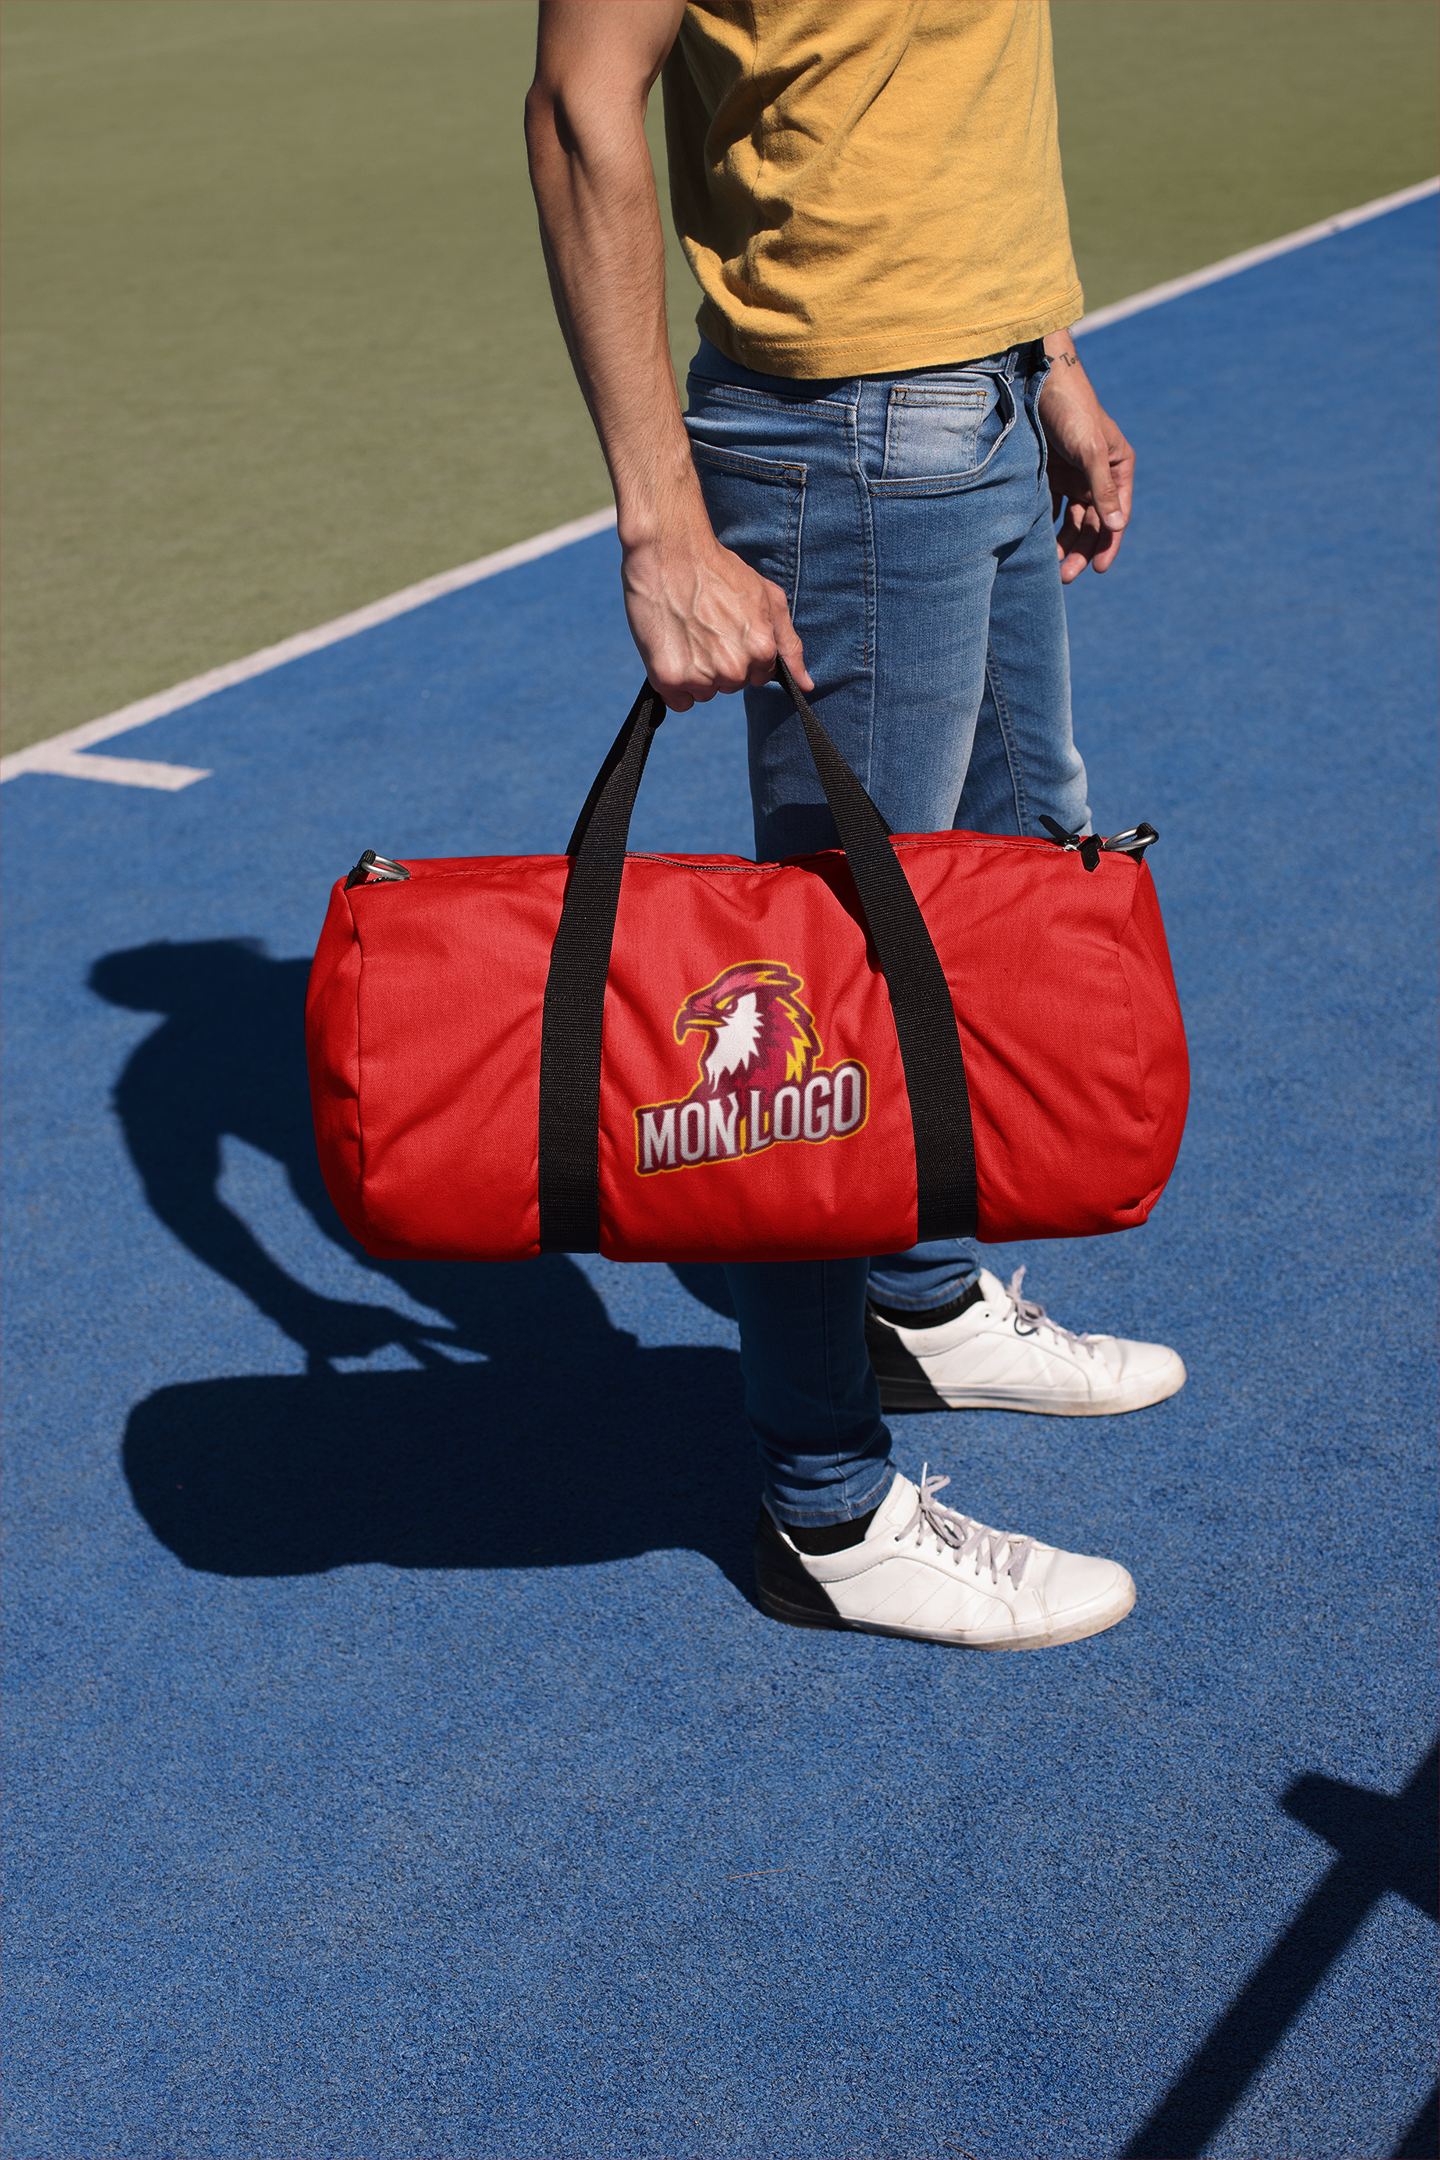 https://mistertee.fr/sites/default/files/mockup-of-a-man-carrying-a-duffel-bag-at-a-court-23223.png